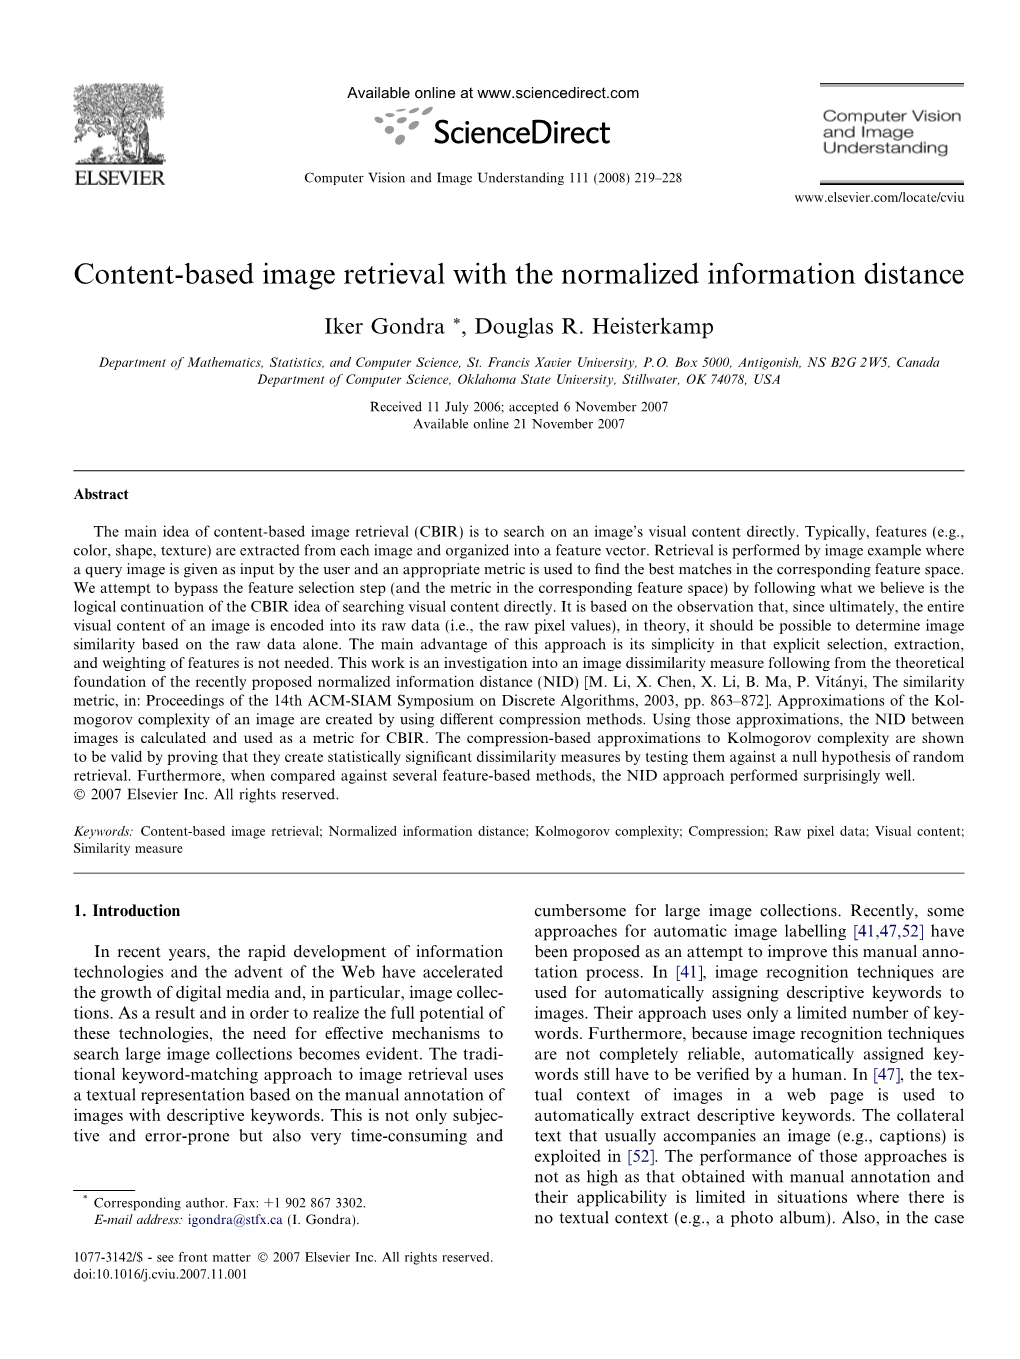 Content-Based Image Retrieval with the Normalized Information Distance